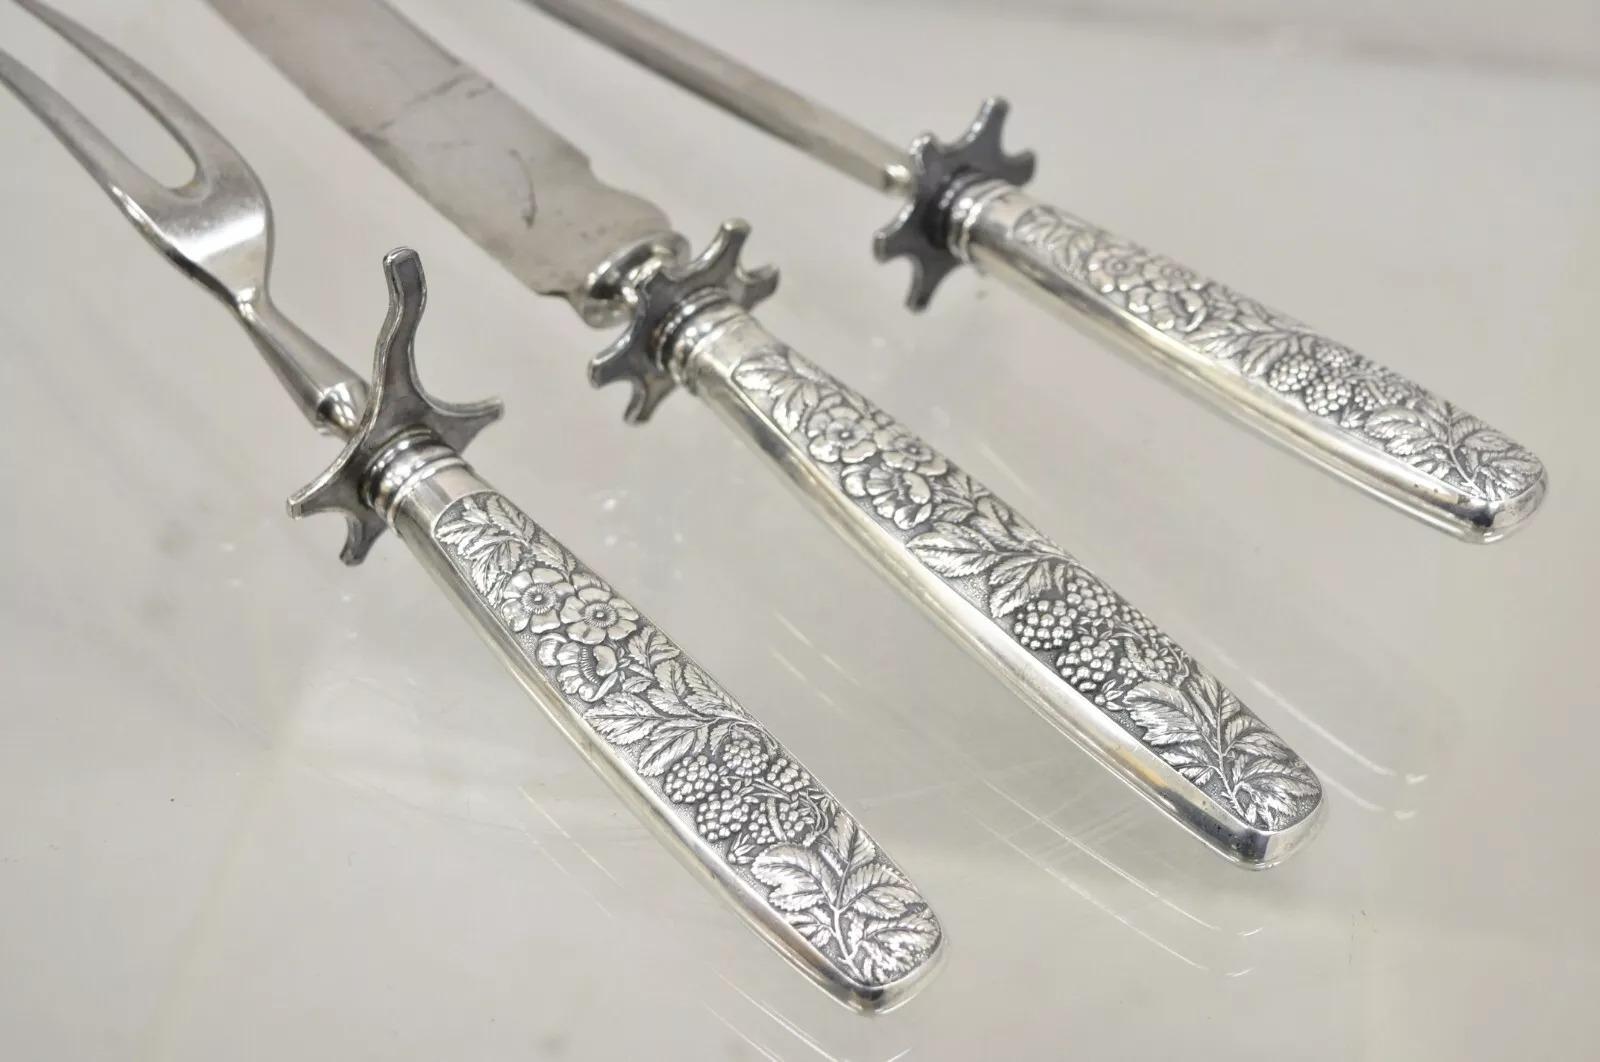 20th Century Antique R Wallace & Sons Victorian Silver Plated Repousse Meat Carving Set - 3Pc For Sale